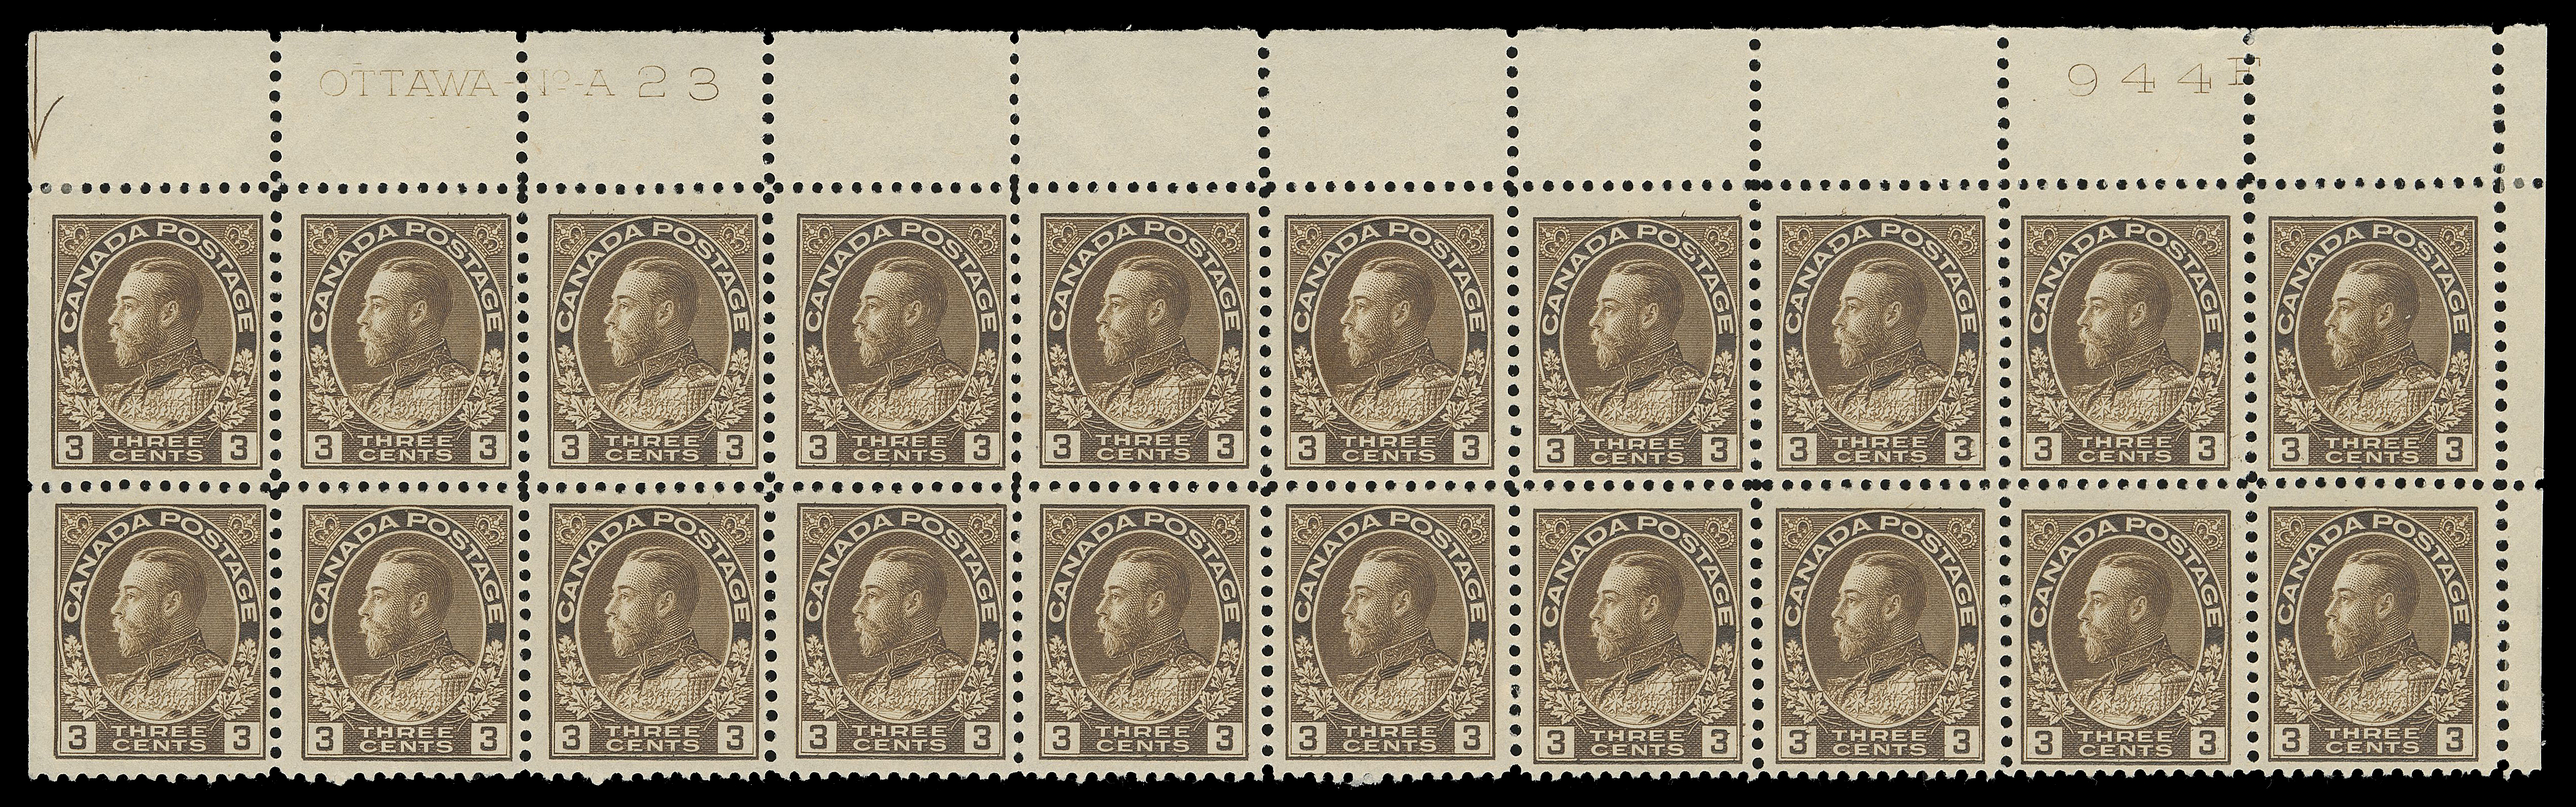 ADMIRAL STAMPS  108 variety,Upper right Plate 23 strip of twenty, quite well centered with deep colour, hinged on straight edged stamps and in right selvedge leaving eighteen stamps NH, F-VF (Unitrade cat. $1,590 as normal stamps)

Stamps in the first three columns show a strong Retouched Vertical Line in upper left and lower left spandrels, among other traits, as discussed in George Marler, "The Admiral Issue of Canada" on page 485. An important plate multiple for the specialist.